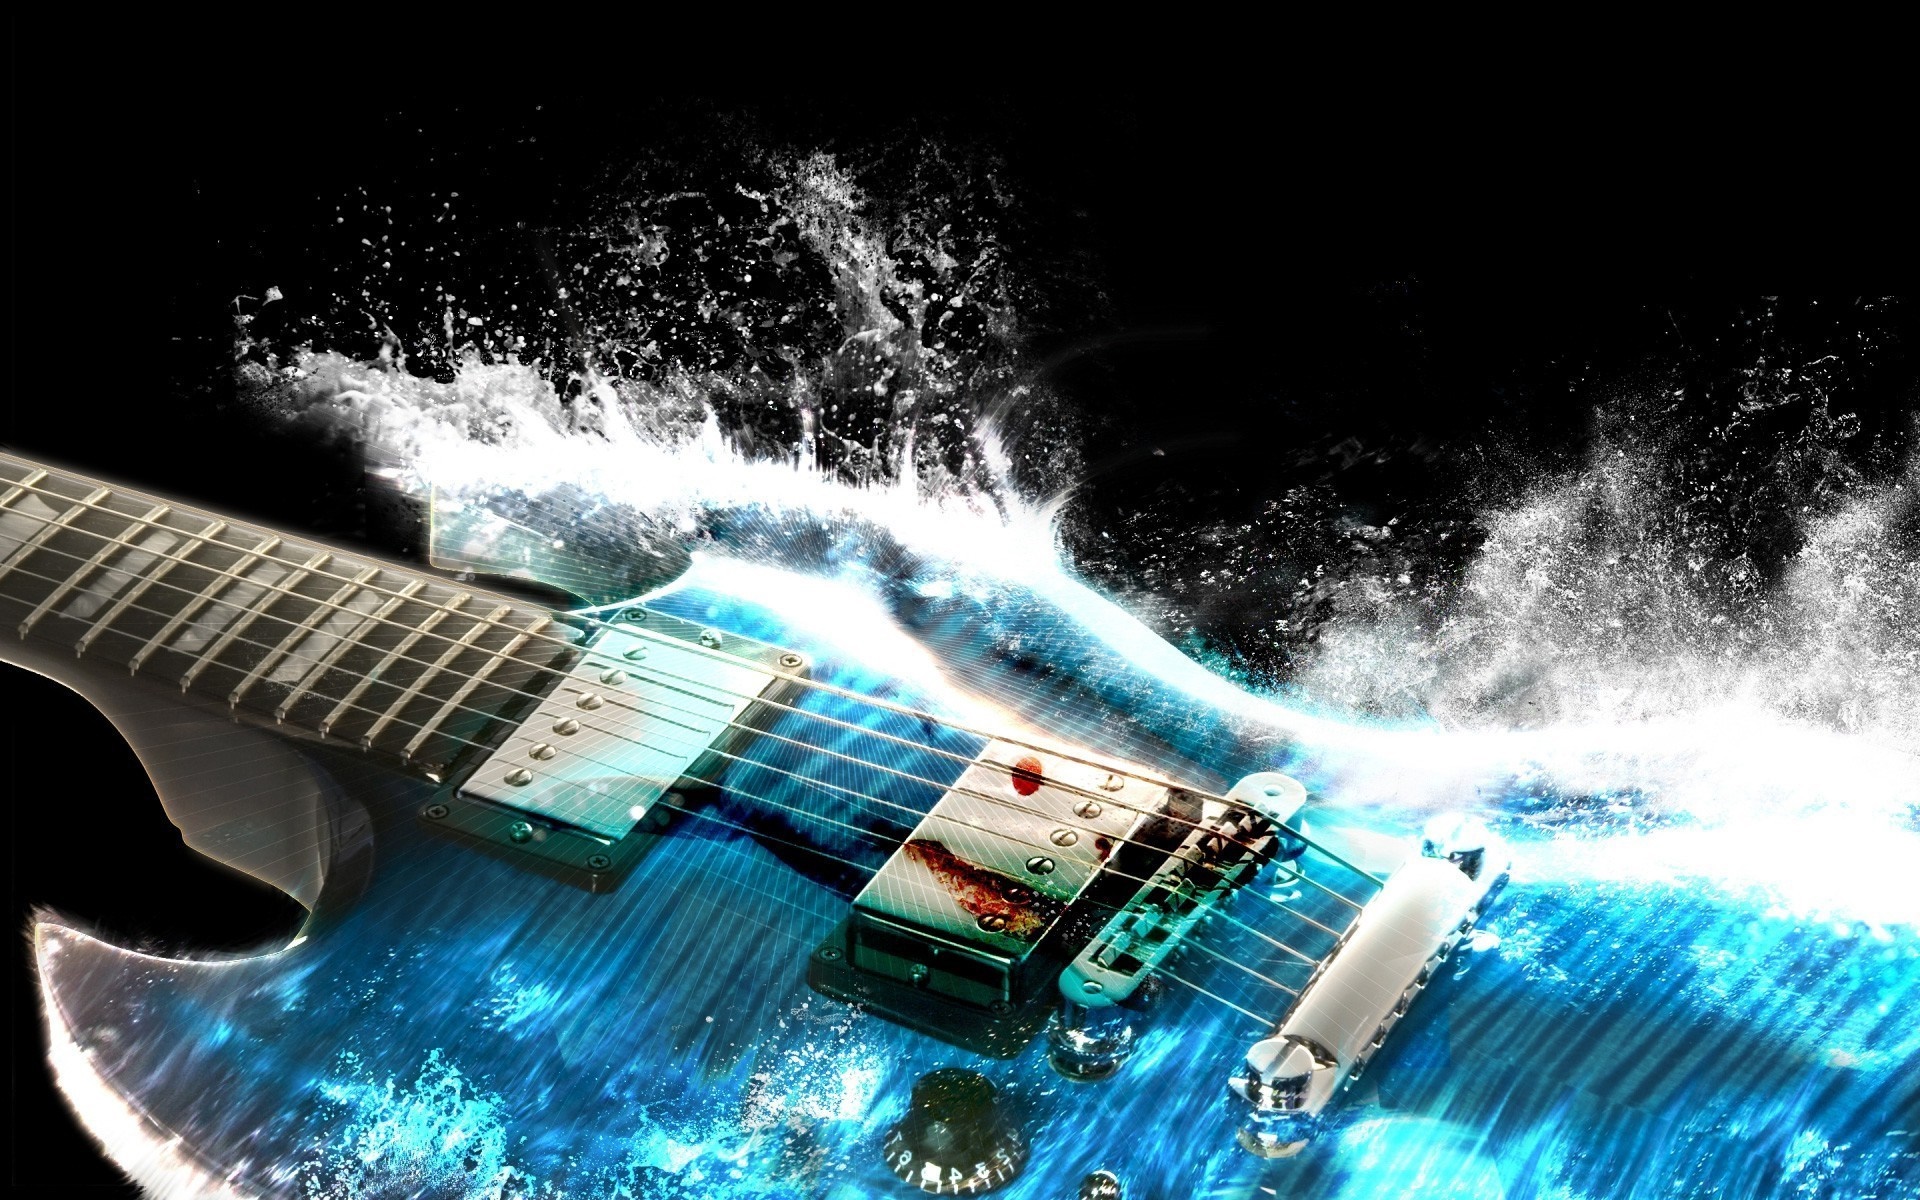 guitar wallpaper, guitar, electric guitar, string instrument, water, plucked string instruments